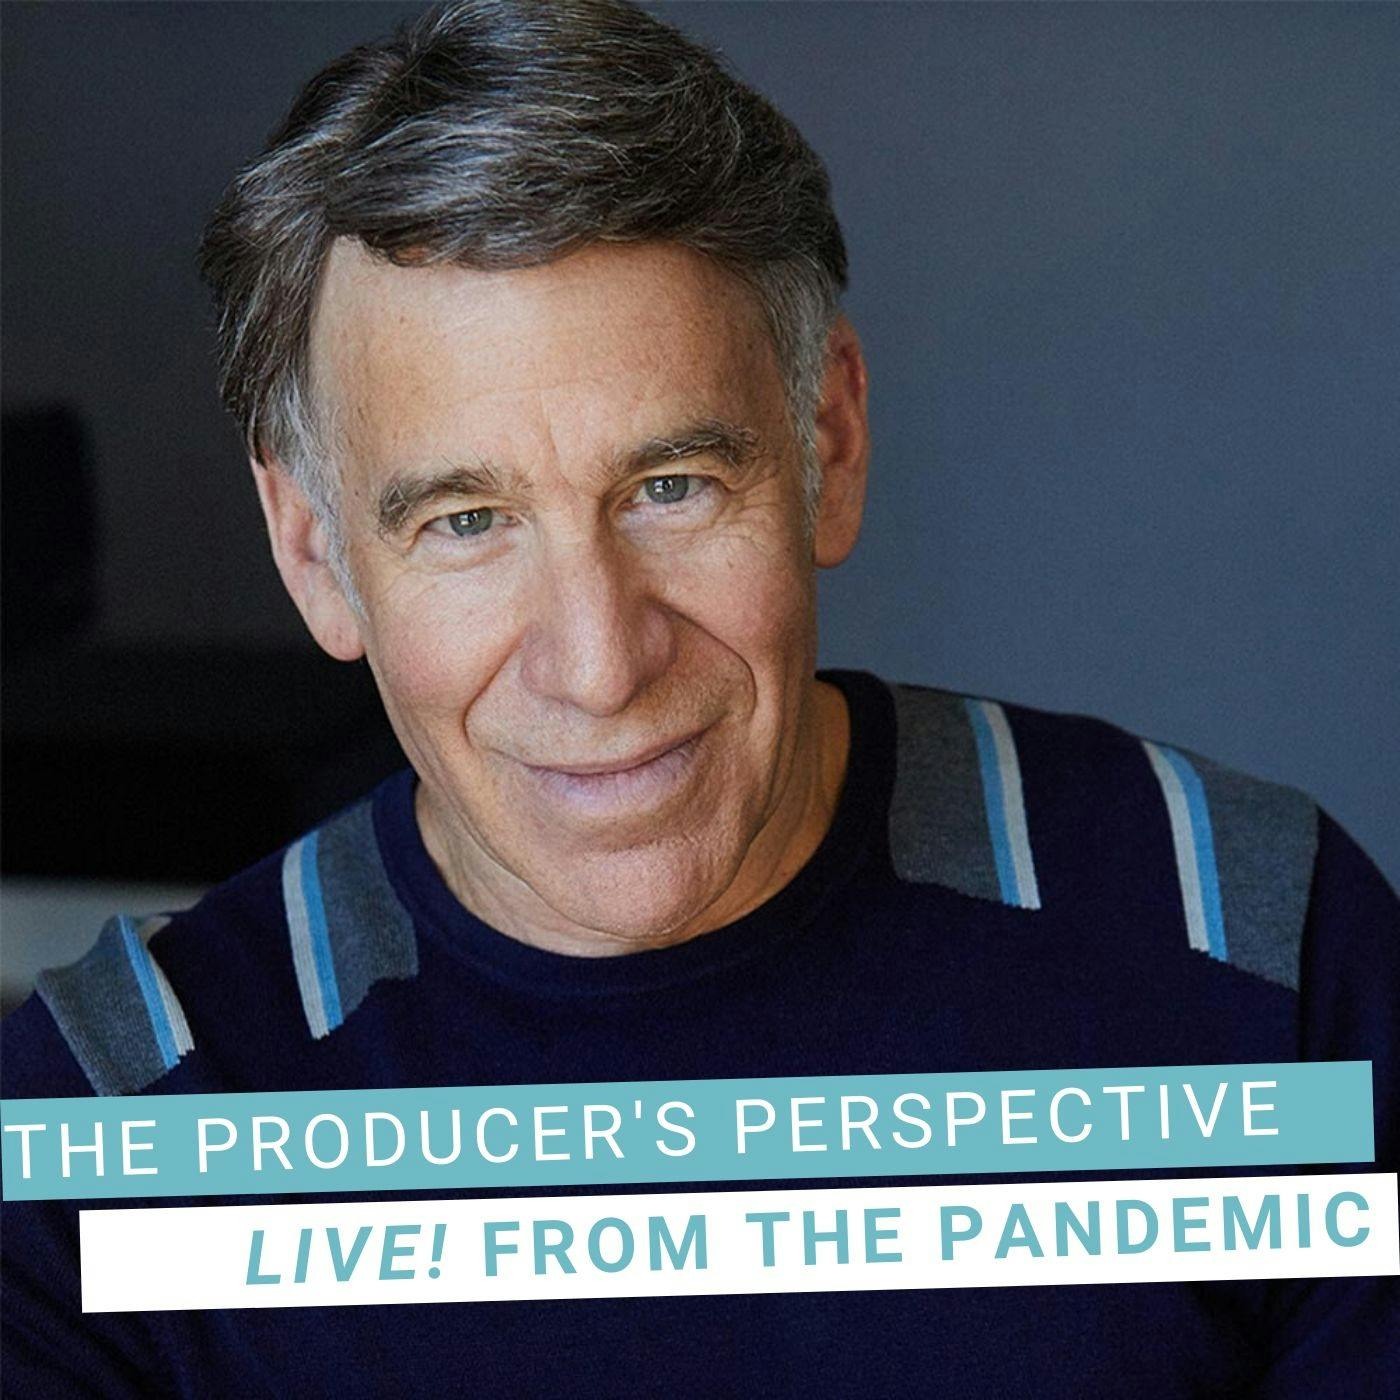 Live From The Pandemic #2: STEPHEN SCHWARTZ